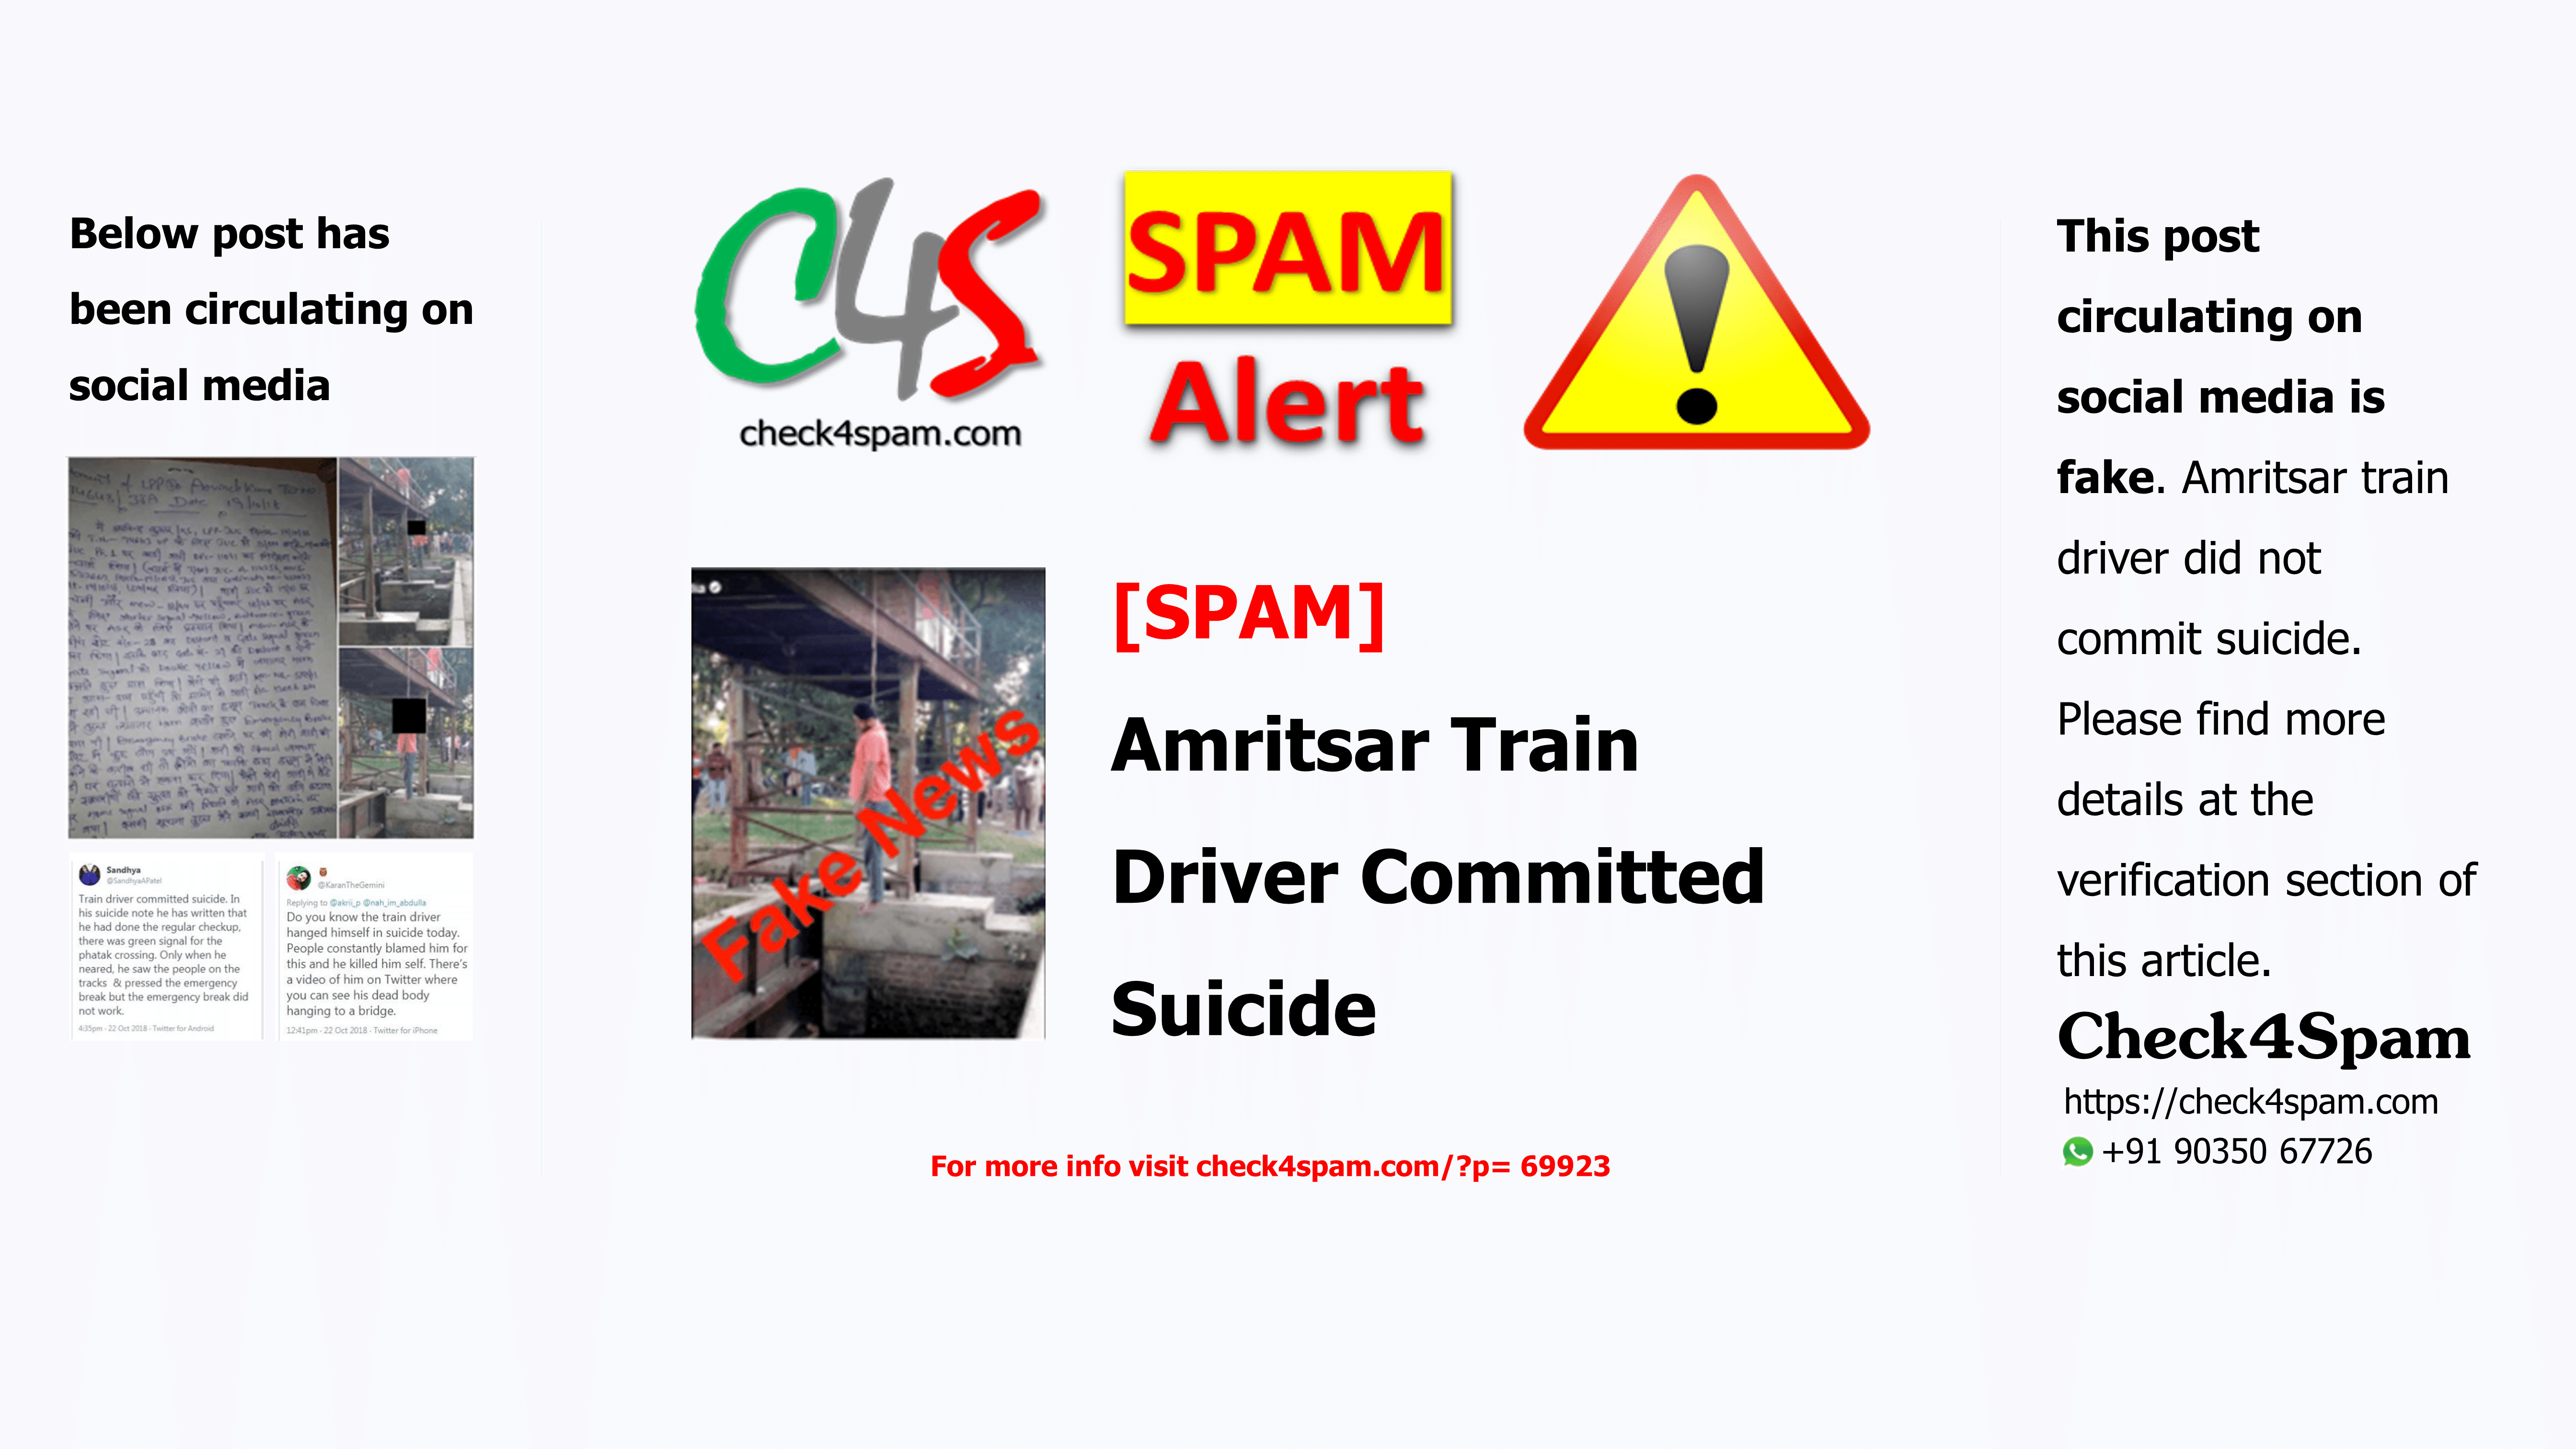 [SPAM] Amritsar Train Driver Committed Suicide